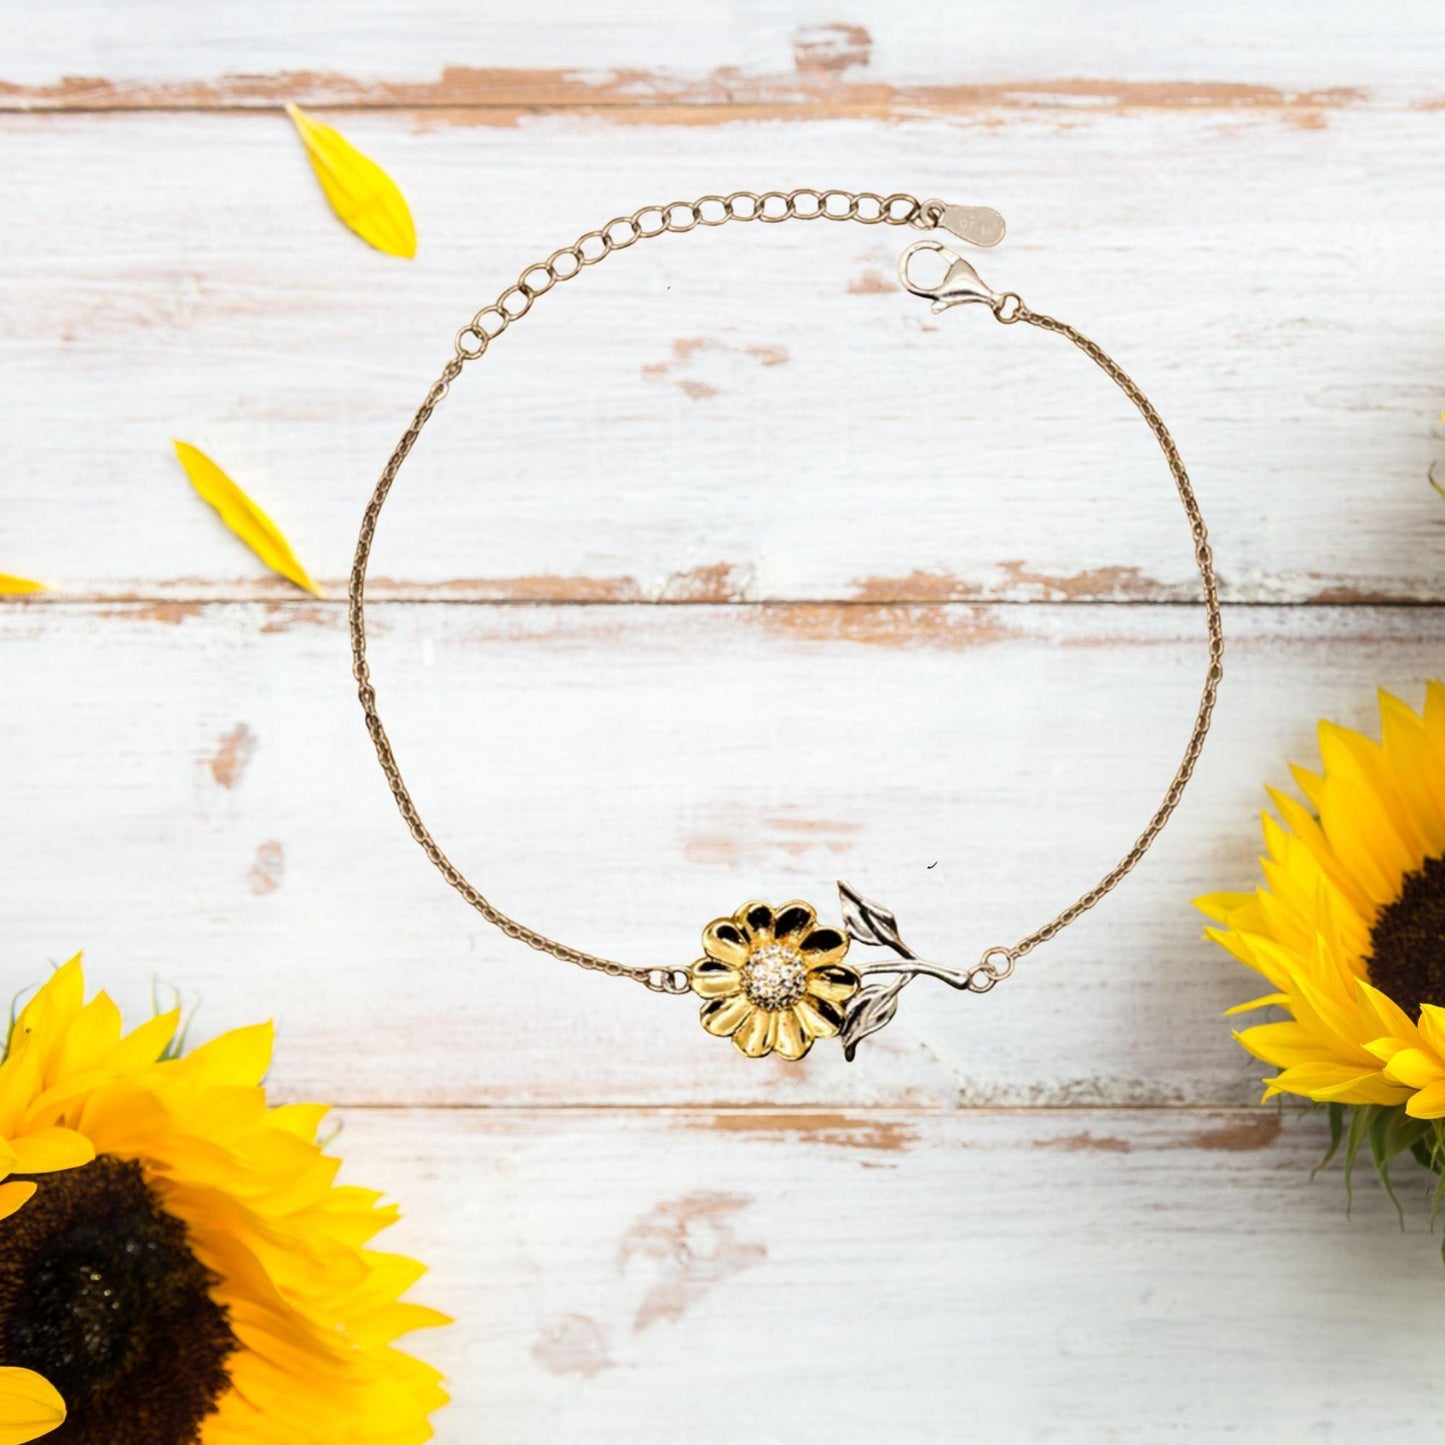 Remarkable Orthodontist Gifts, Your dedication and hard work, Inspirational Birthday Christmas Unique Sunflower Bracelet For Orthodontist, Coworkers, Men, Women, Friends - Mallard Moon Gift Shop